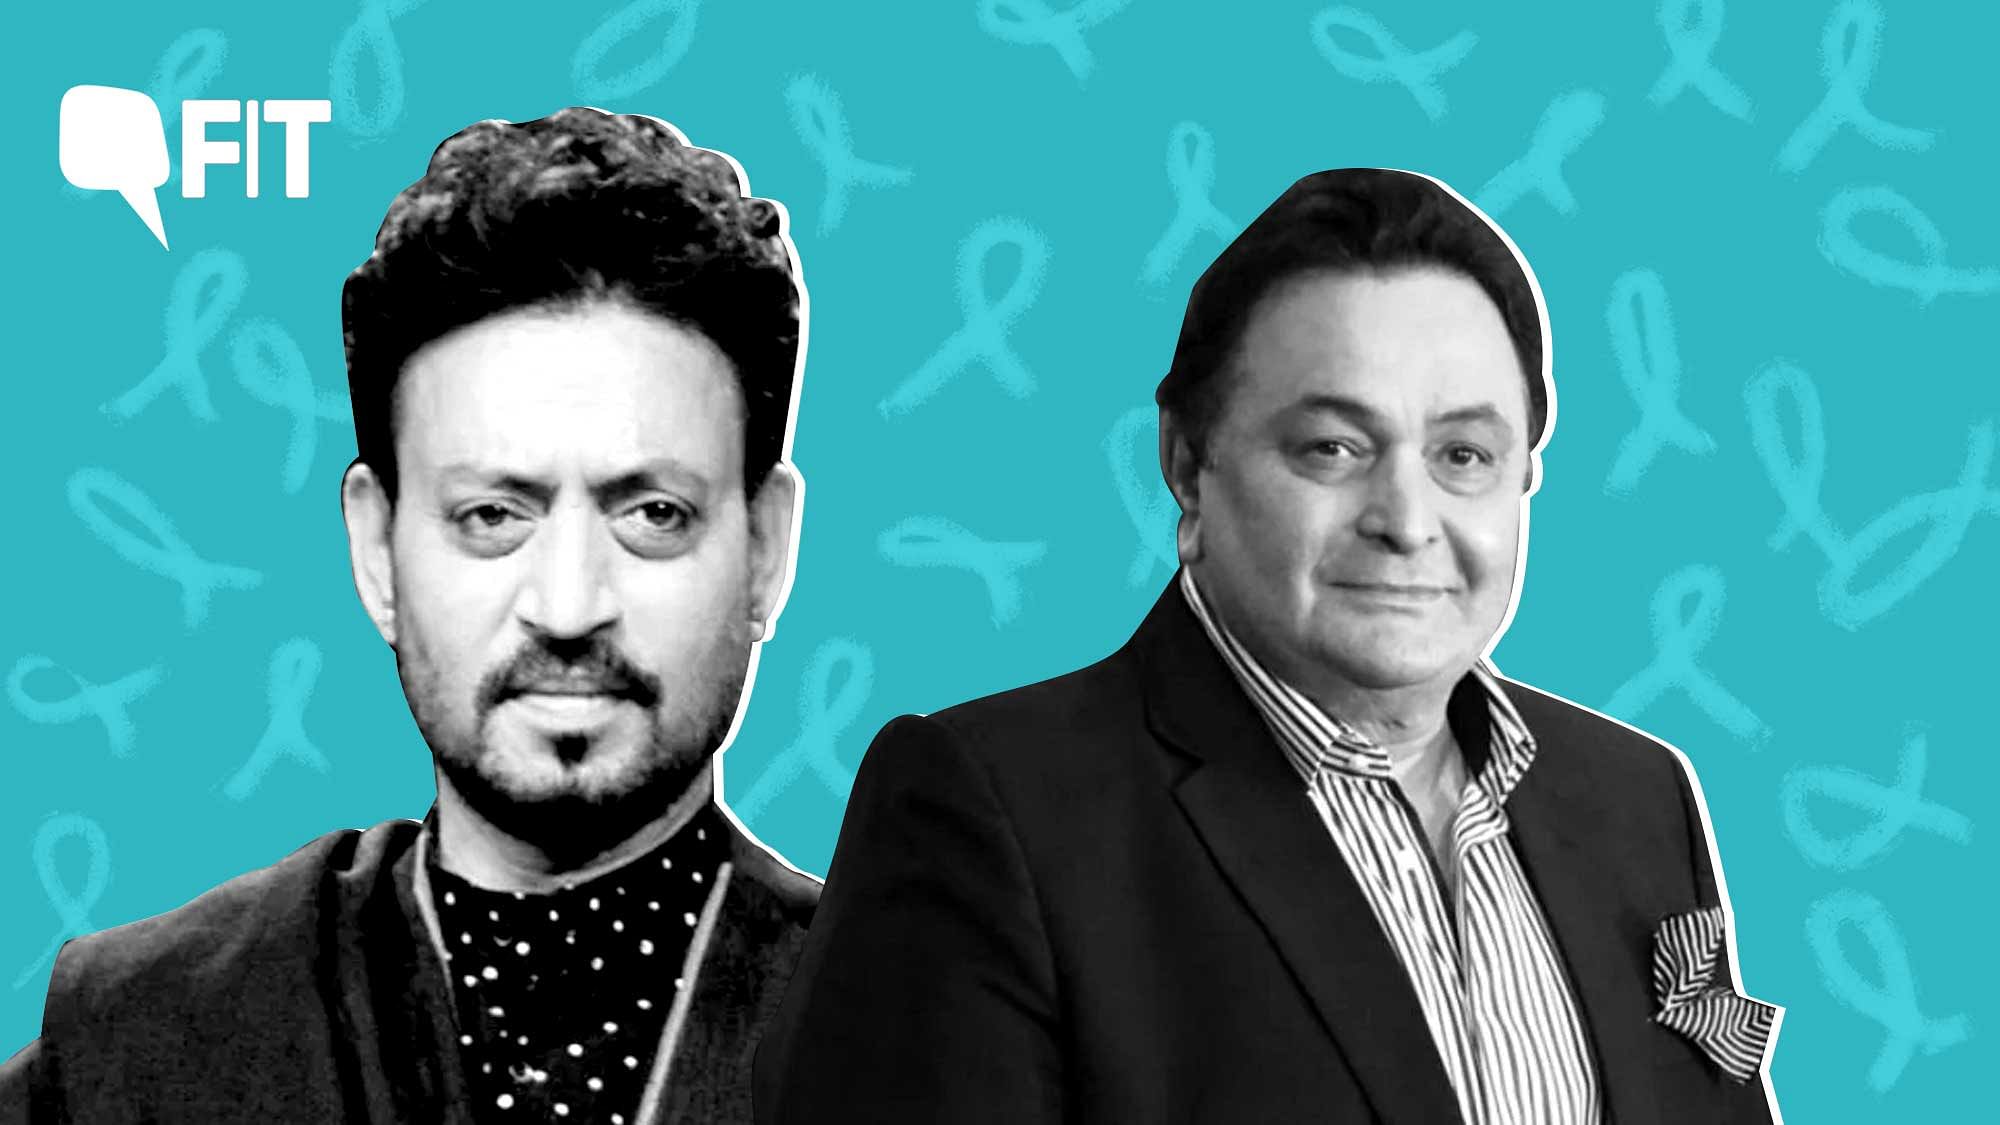 Both Irfaan Khan and Rishi Kapoor lost their battle to cancer. Other cancer patients are also suffering in the times of COVID-19 lockdowns.